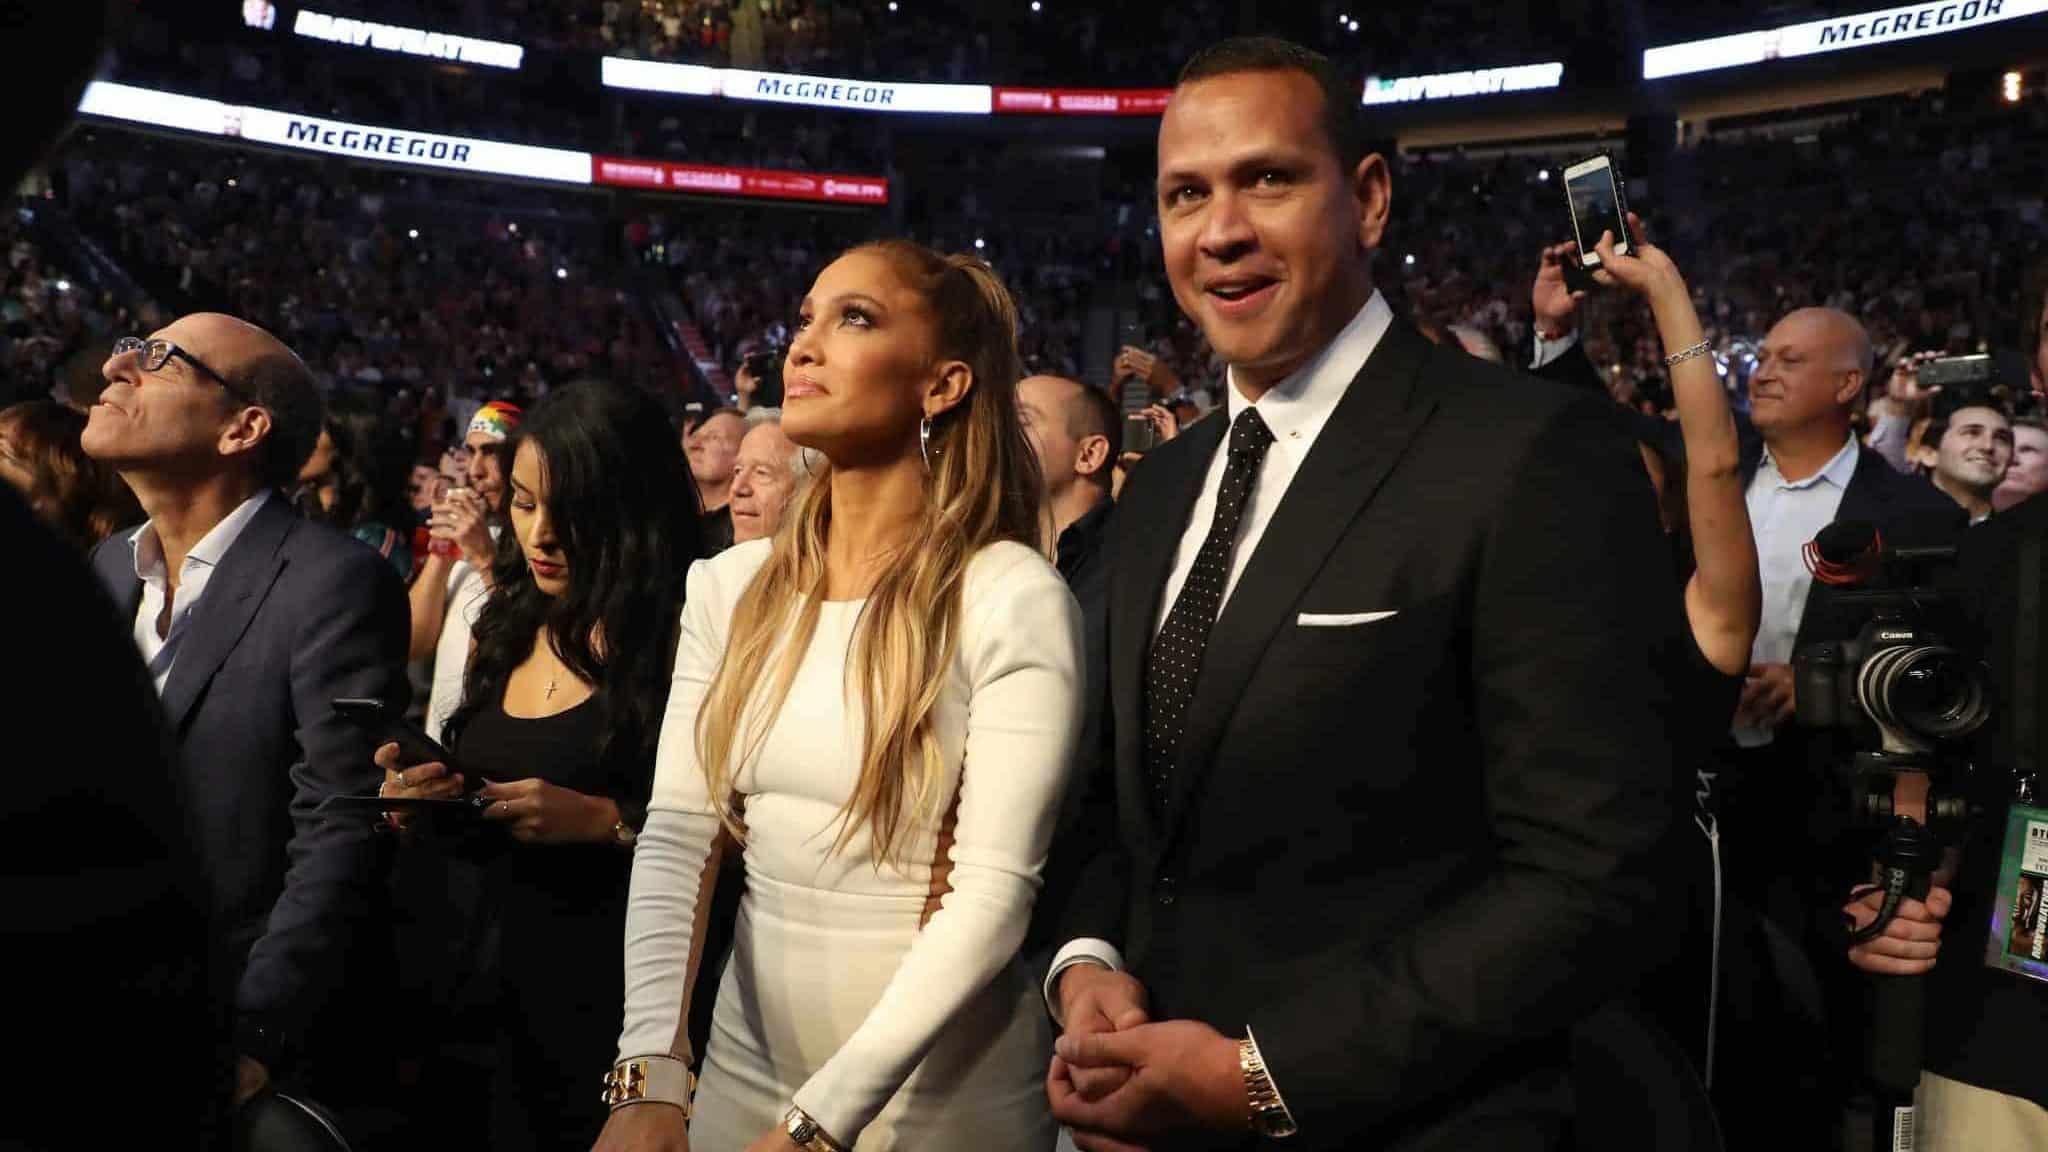 LAS VEGAS, NV - AUGUST 26: Actress Jennifer Lopez and former MLB player Alex Rodriguez attend the super welterweight boxing match between Floyd Mayweather Jr. and Conor McGregor on August 26, 2017 at T-Mobile Arena in Las Vegas, Nevada.